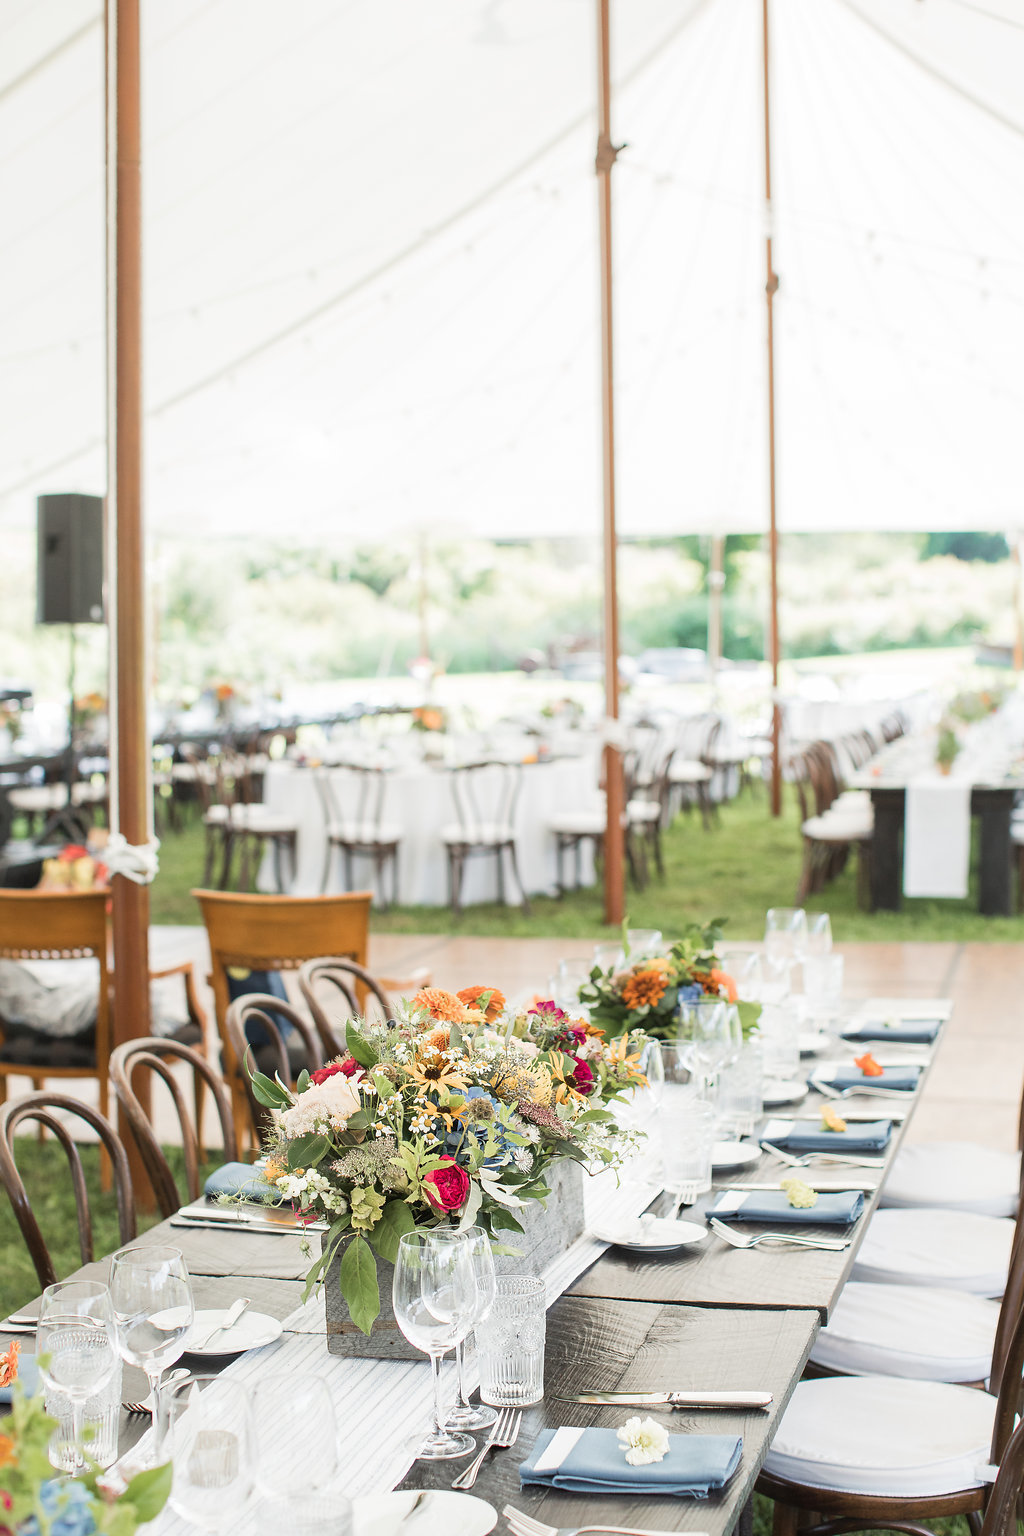 Monica-Relyea-Events-Kelsey-Combe-Photography-Dana-and-Mark-South-Farms-wedding-morris-connecticut-barn-tent-jewish-farm-country-litchfield-county494